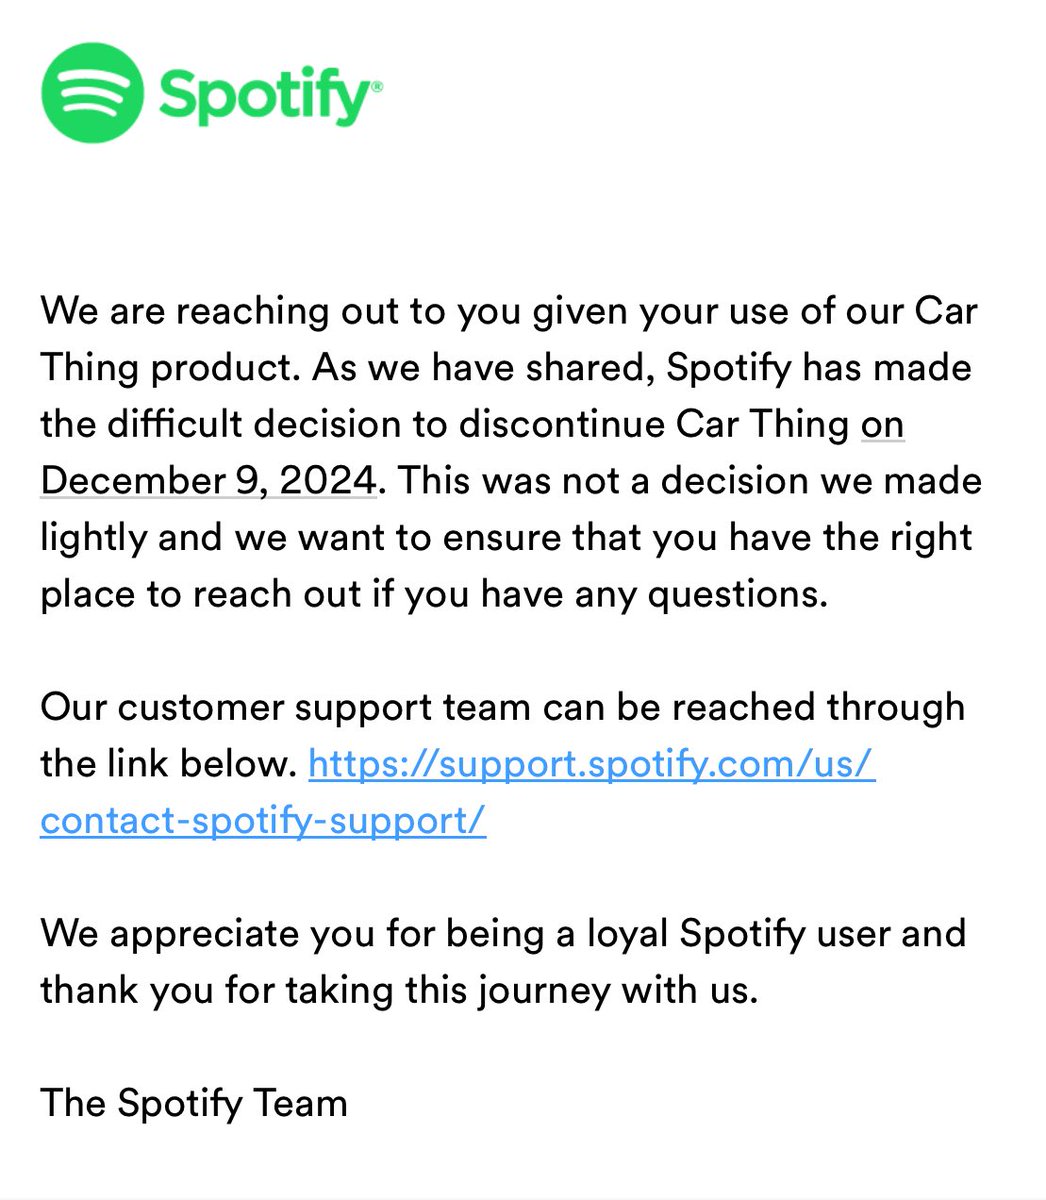 Hey @spotify so the car thing I bought is going to be useless by Christmas that sucks from a loyal Spotify user 😭